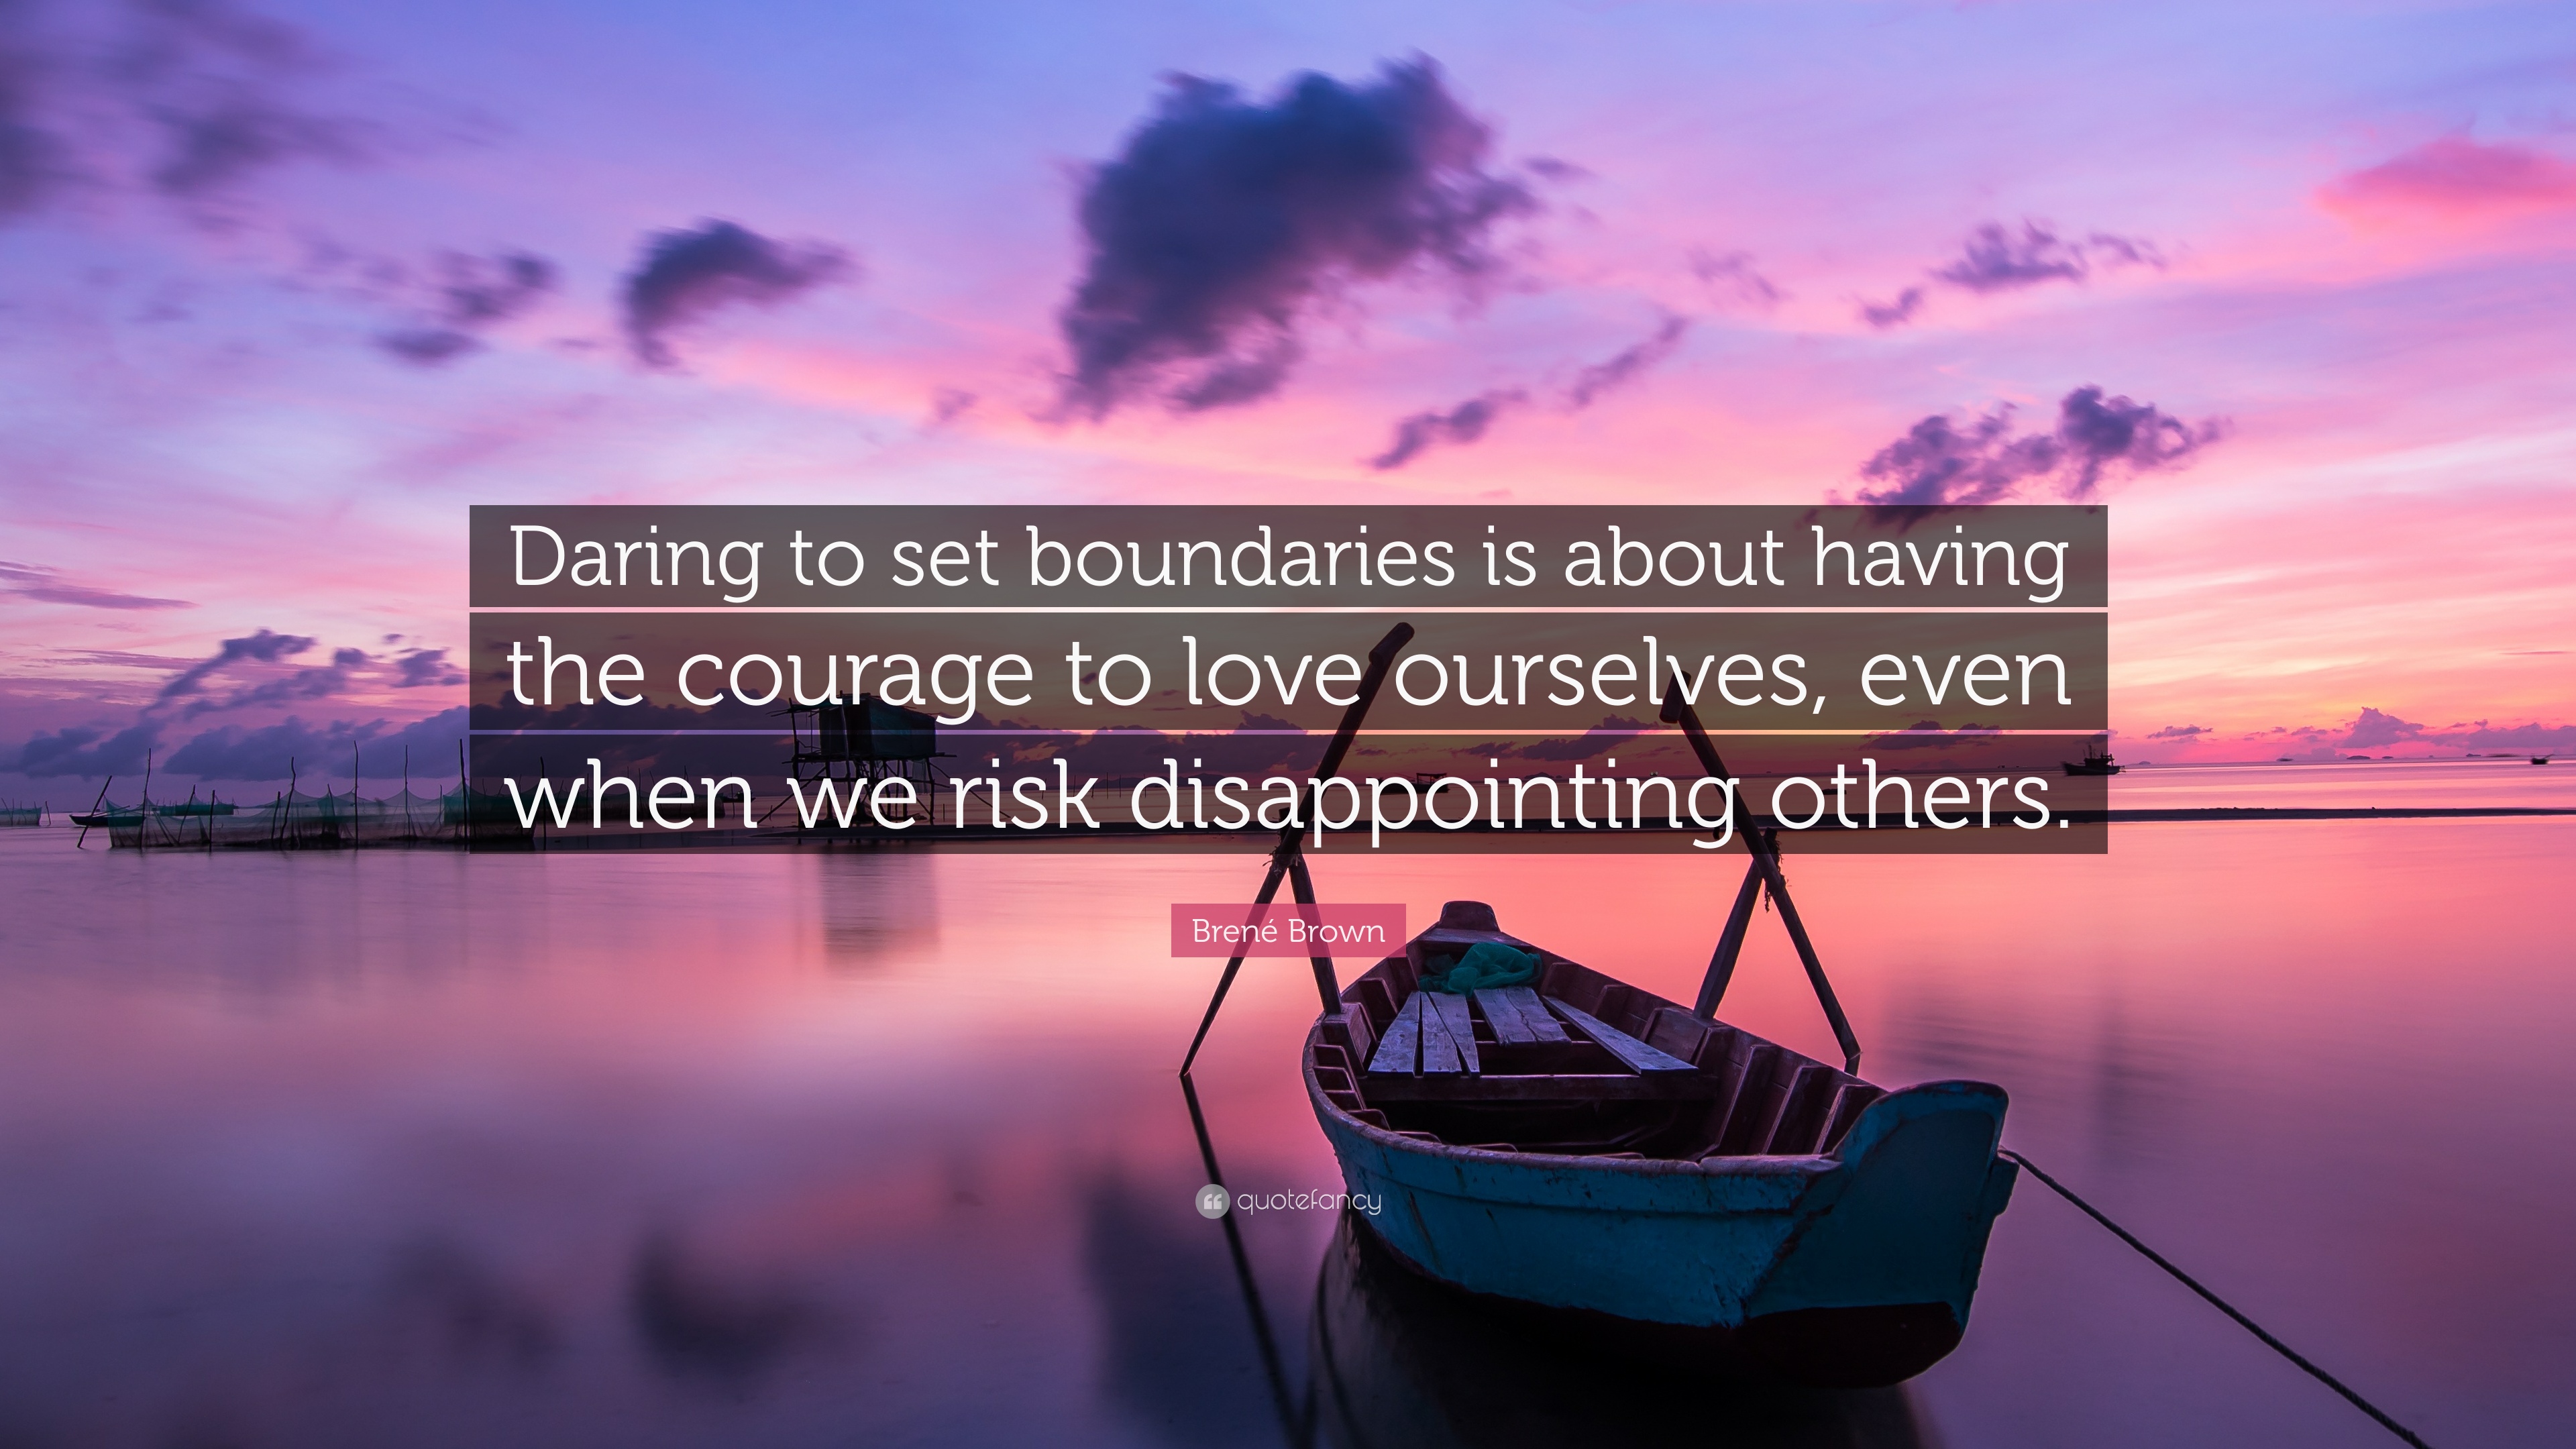 Brené Brown Quote: “Daring to set boundaries is about having the ...